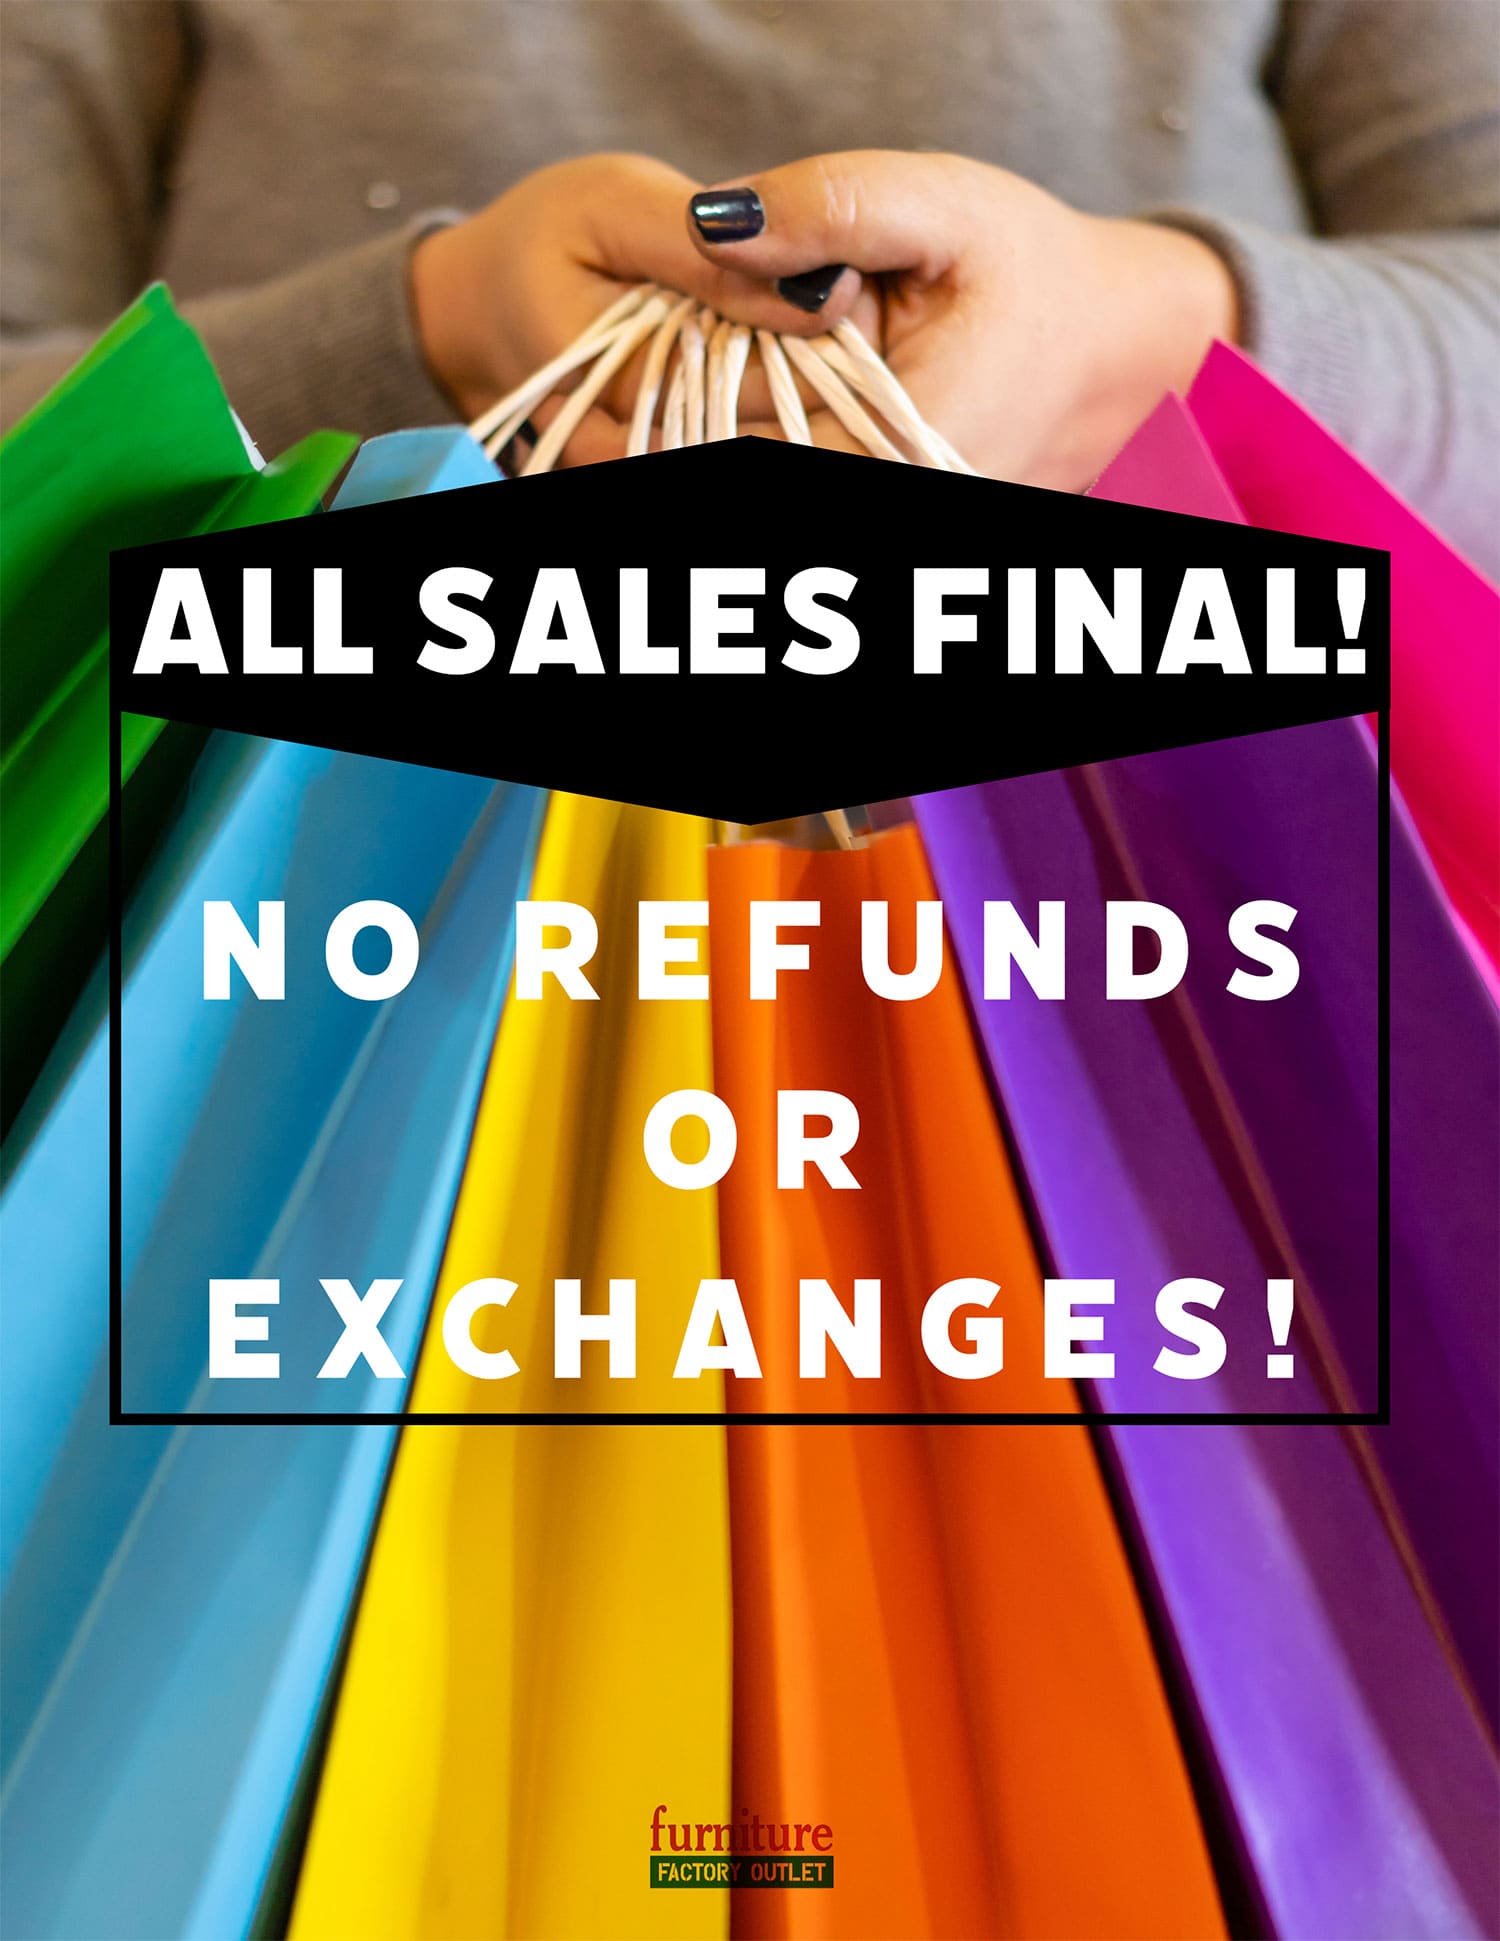 All sales final. No refunds or exchanges